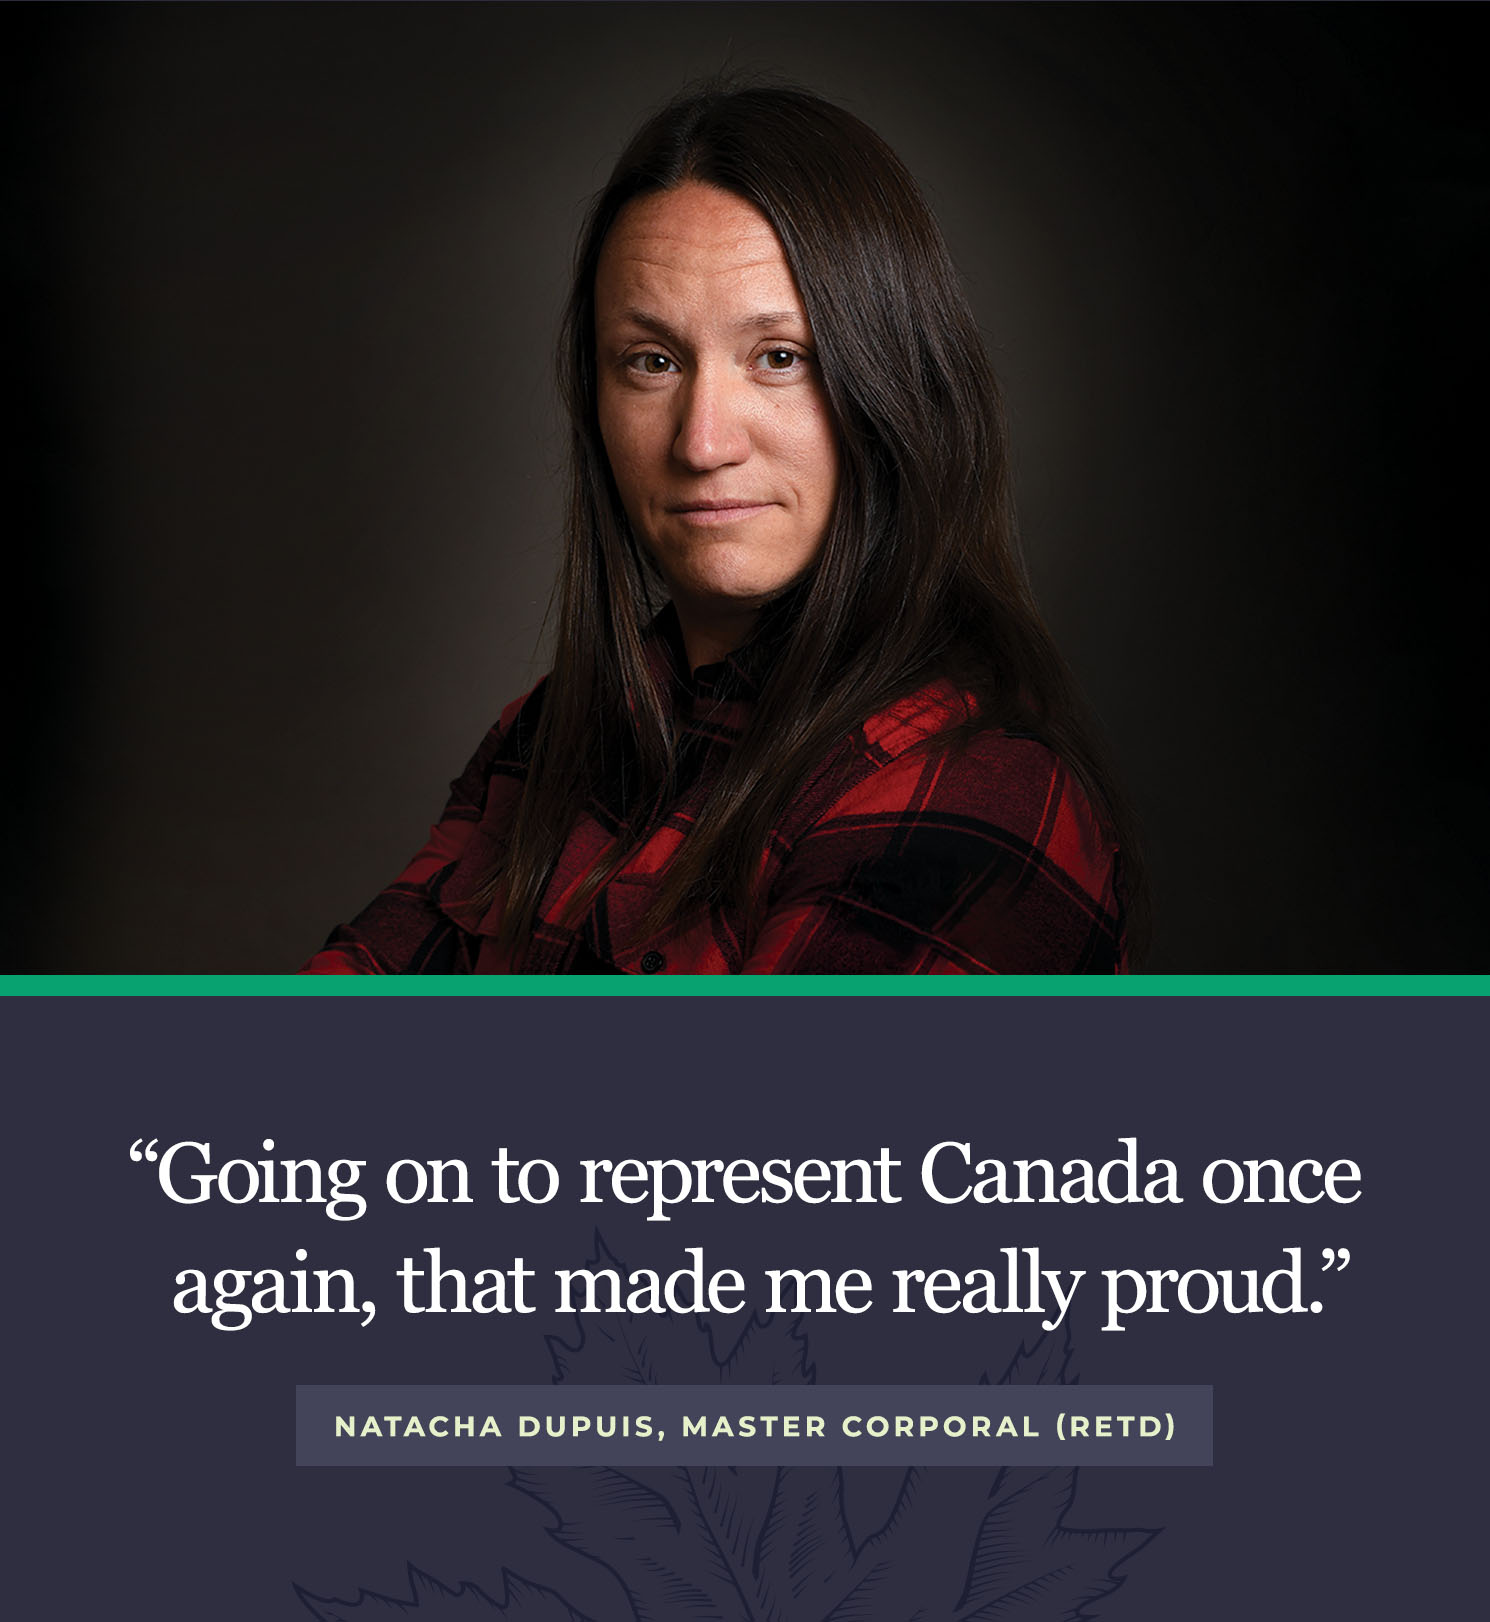 Going on to represent Canada once again, that made me really proud. The Invictus Games were my Olympics. - Natacha Dupuis - Master Corporal (Retd)